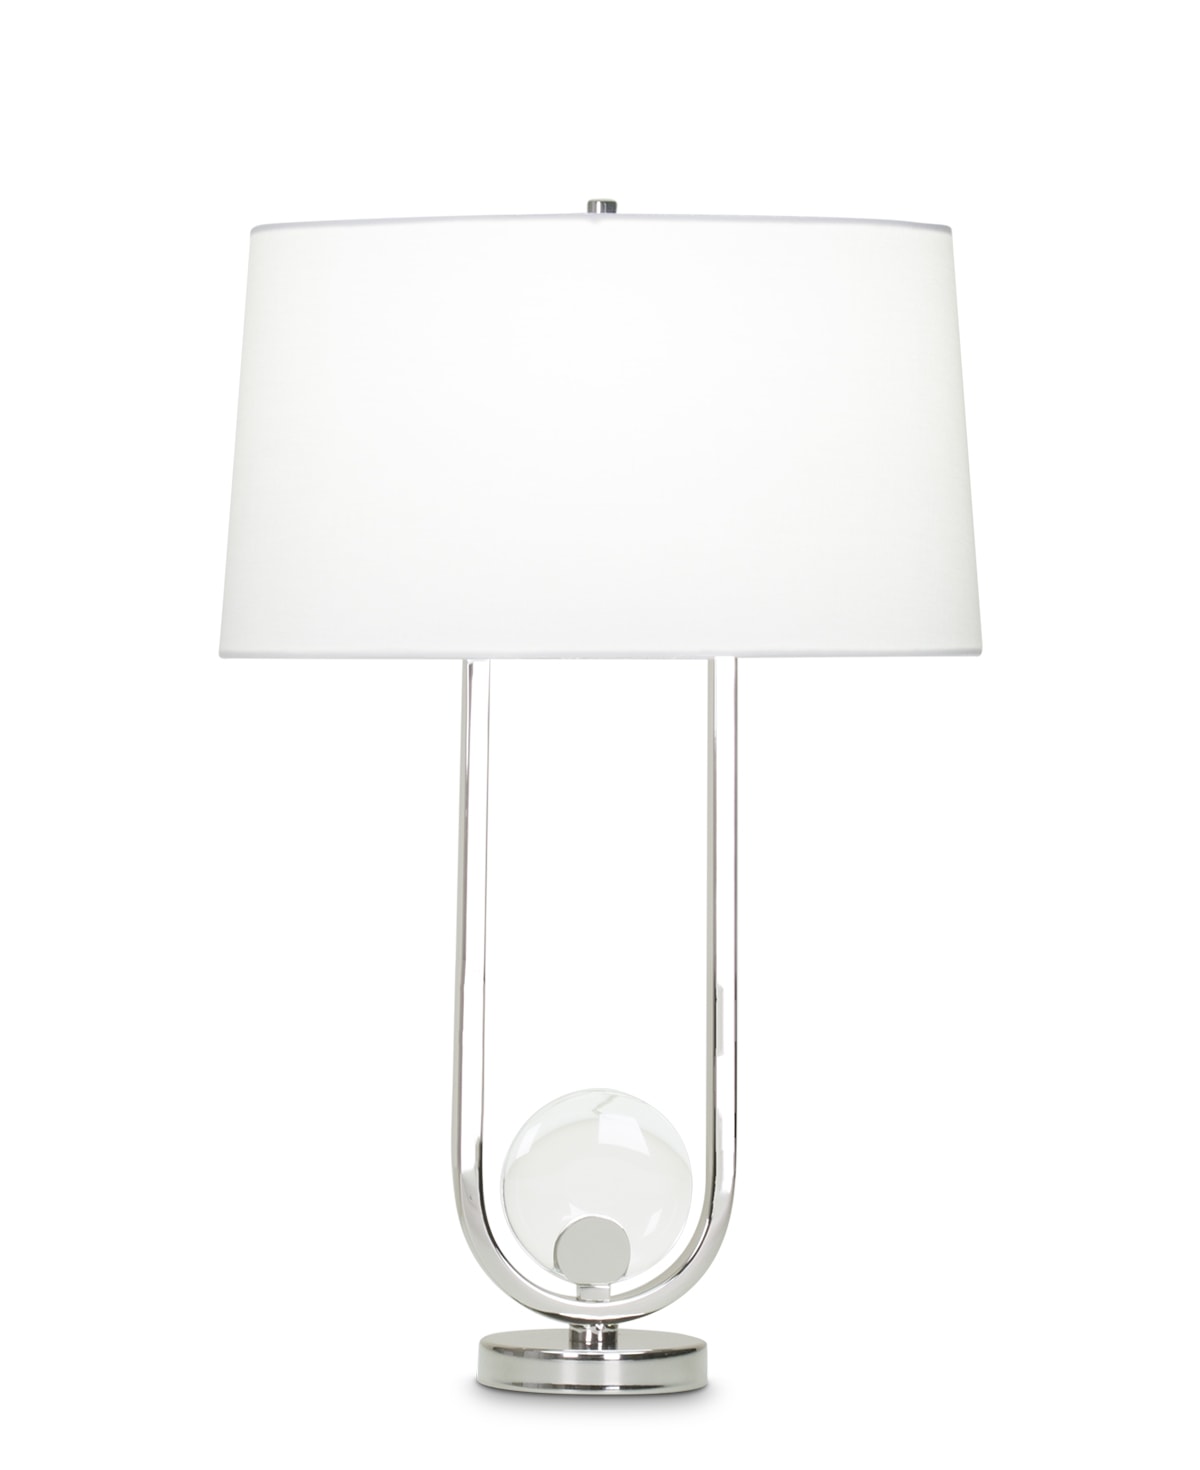 FlowDecor Doyle Table Lamp in metal with polished nickel finish and crystal and white linen oval shade (# 4041)